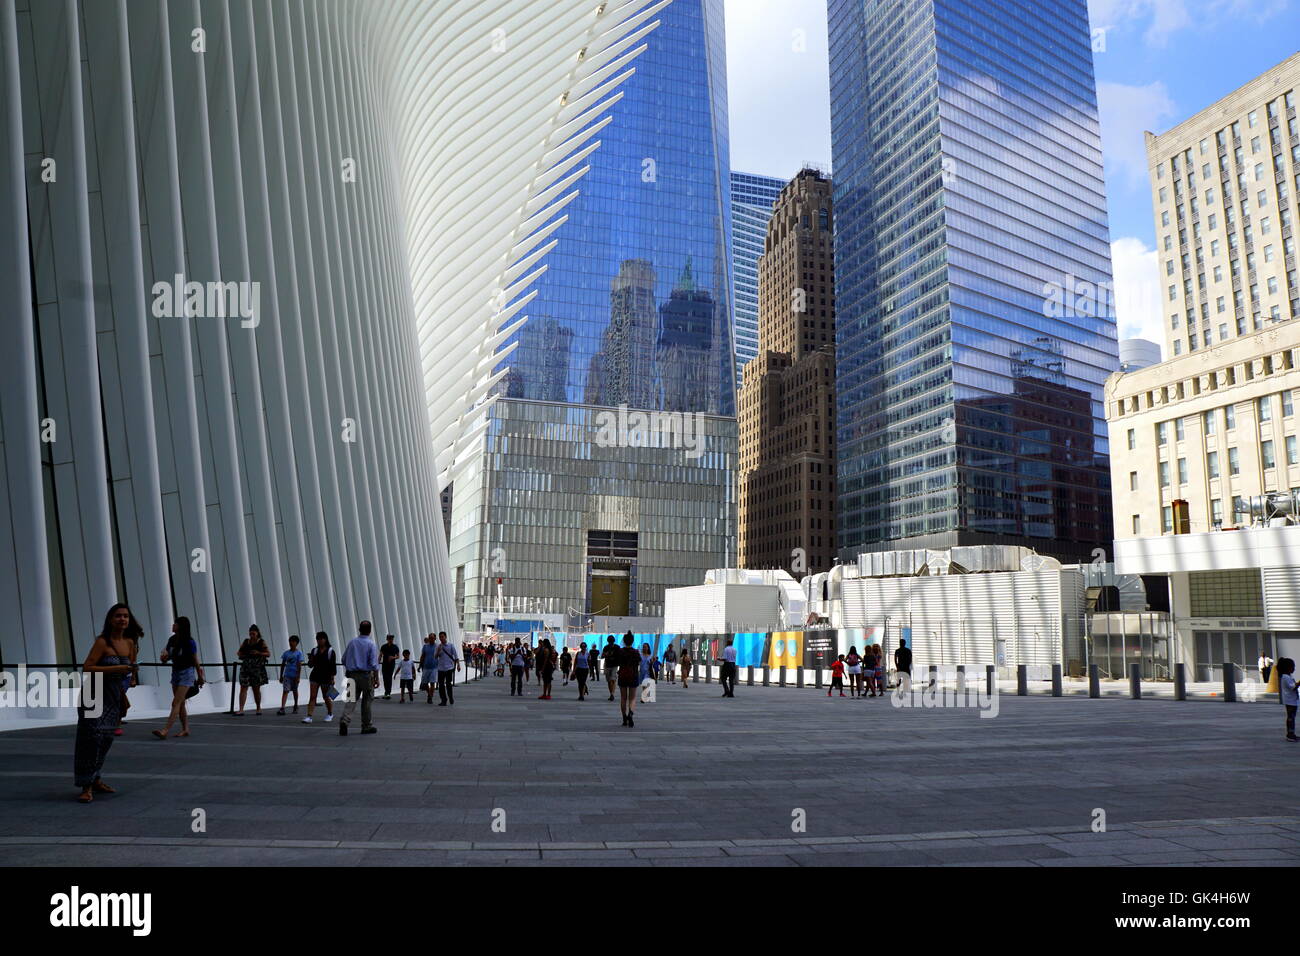 The Oculus (Westfield Mall) with the backdrop of One and Two World Trade Center towers in New York City, New York, USA Stock Photo